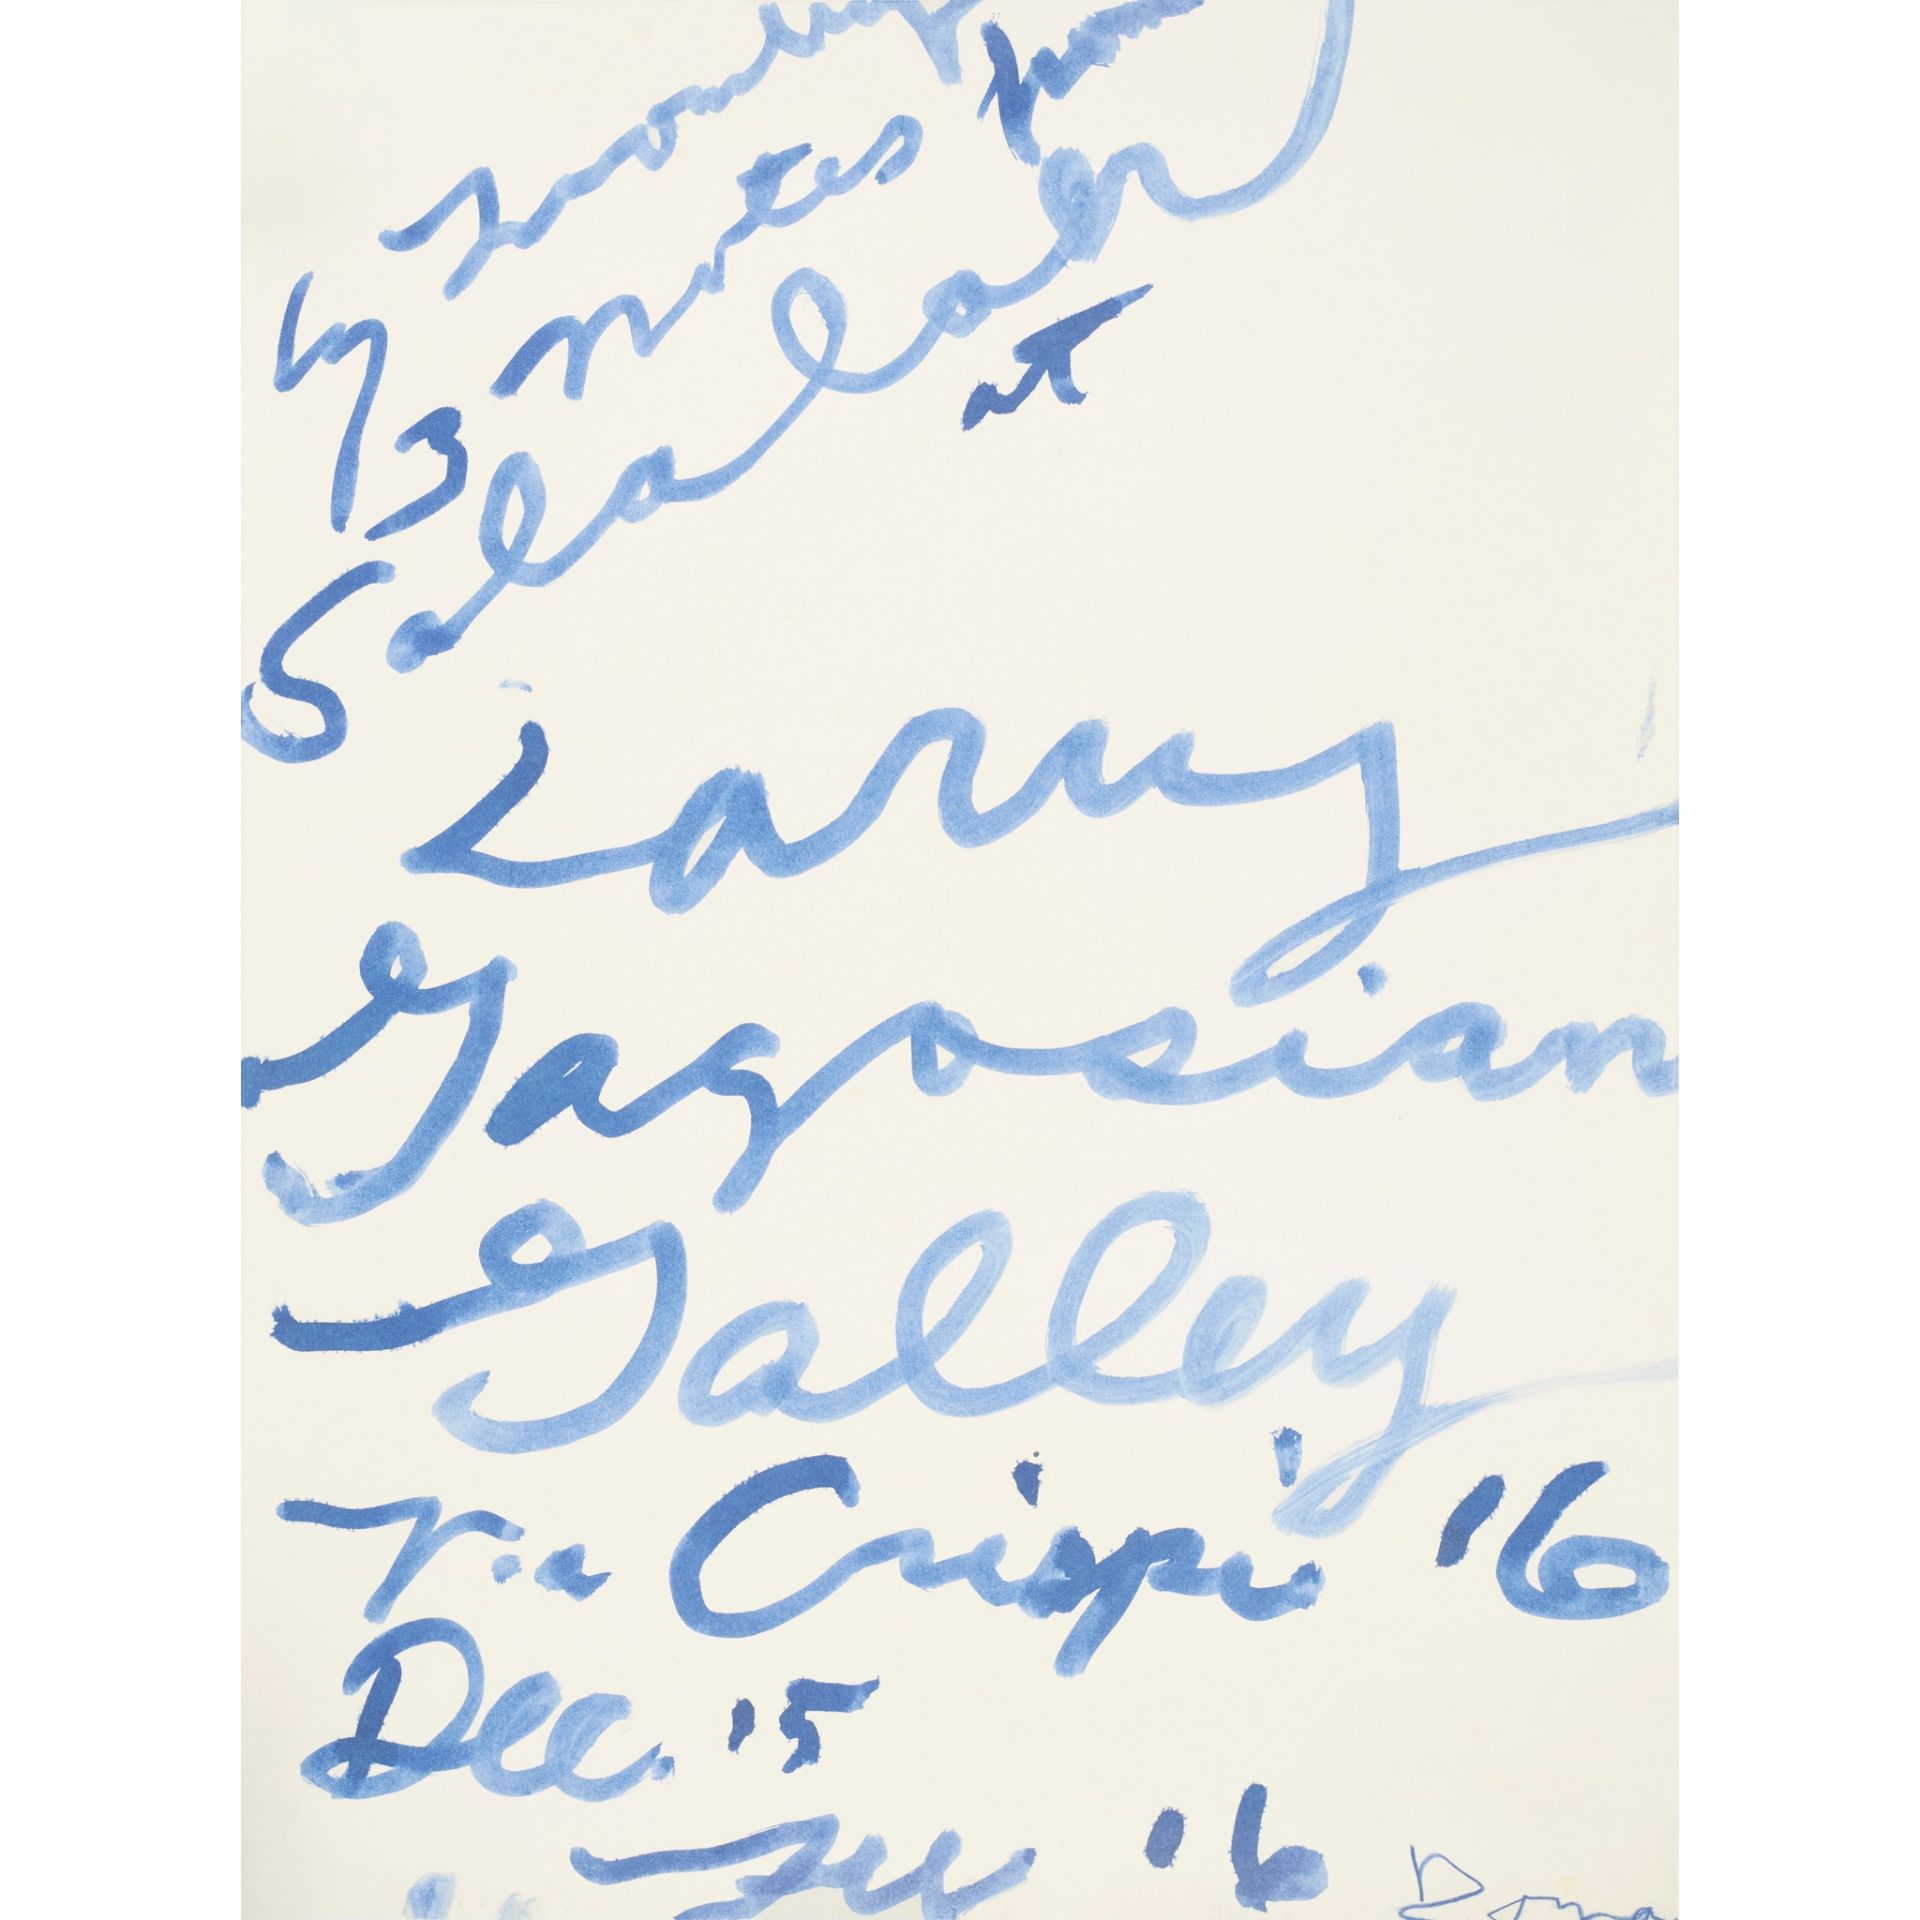 CY TWOMBLY (AMERICAN 1928-2011) NOTES FROM SALALAH - 2008